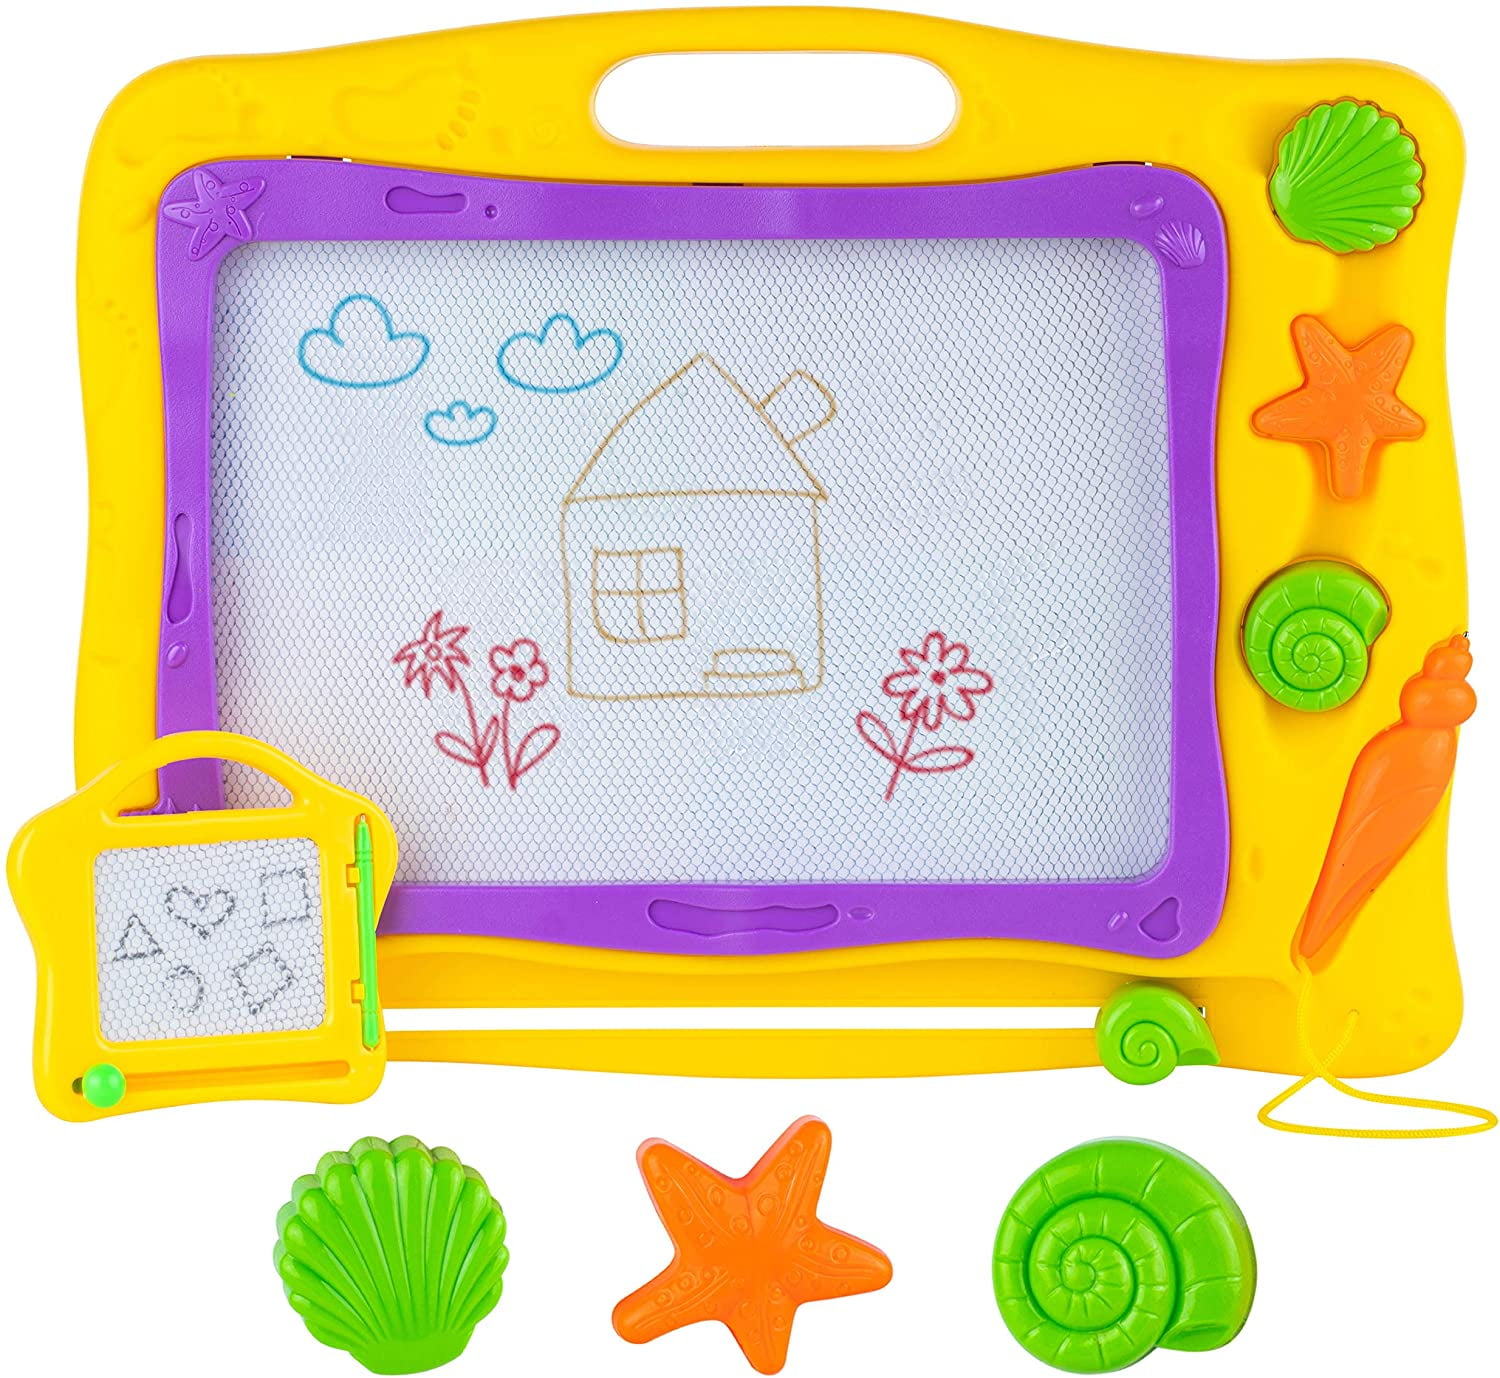 Magnetic Drawing Board For Toddlers Extra LARGE 13 X 17" Magna Doodles Kids BLUE 